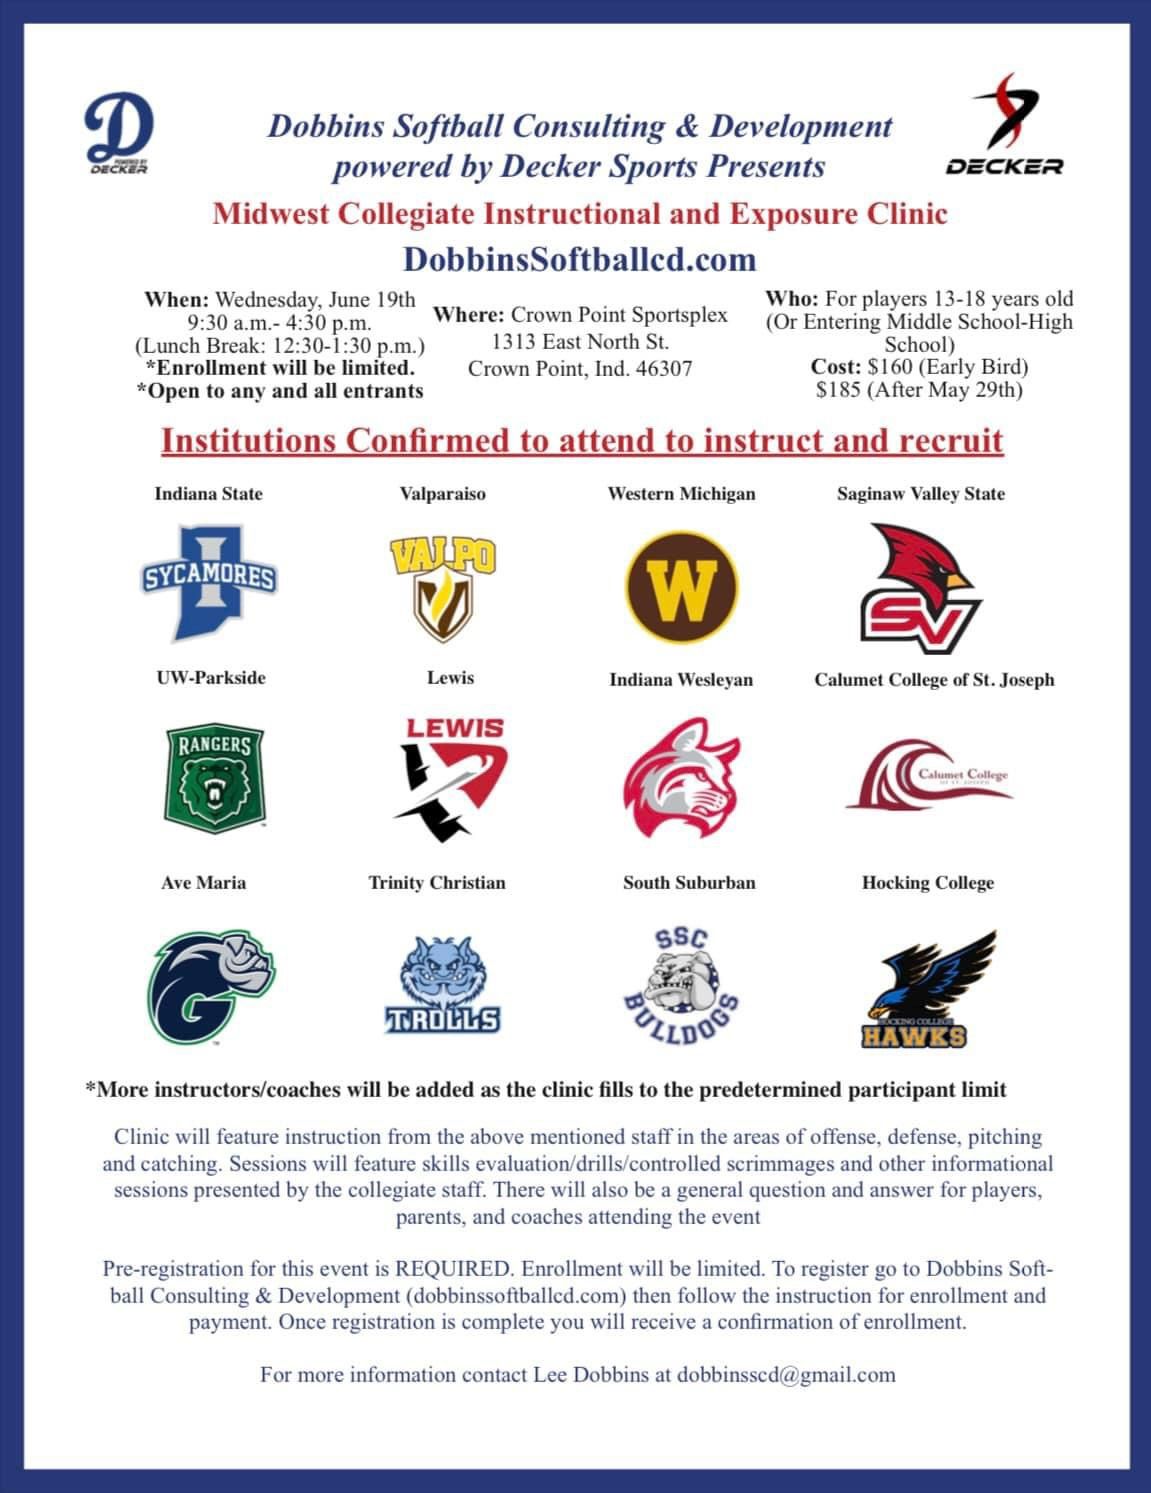 Midwest Collegiate Instructional and Exposure Clinic